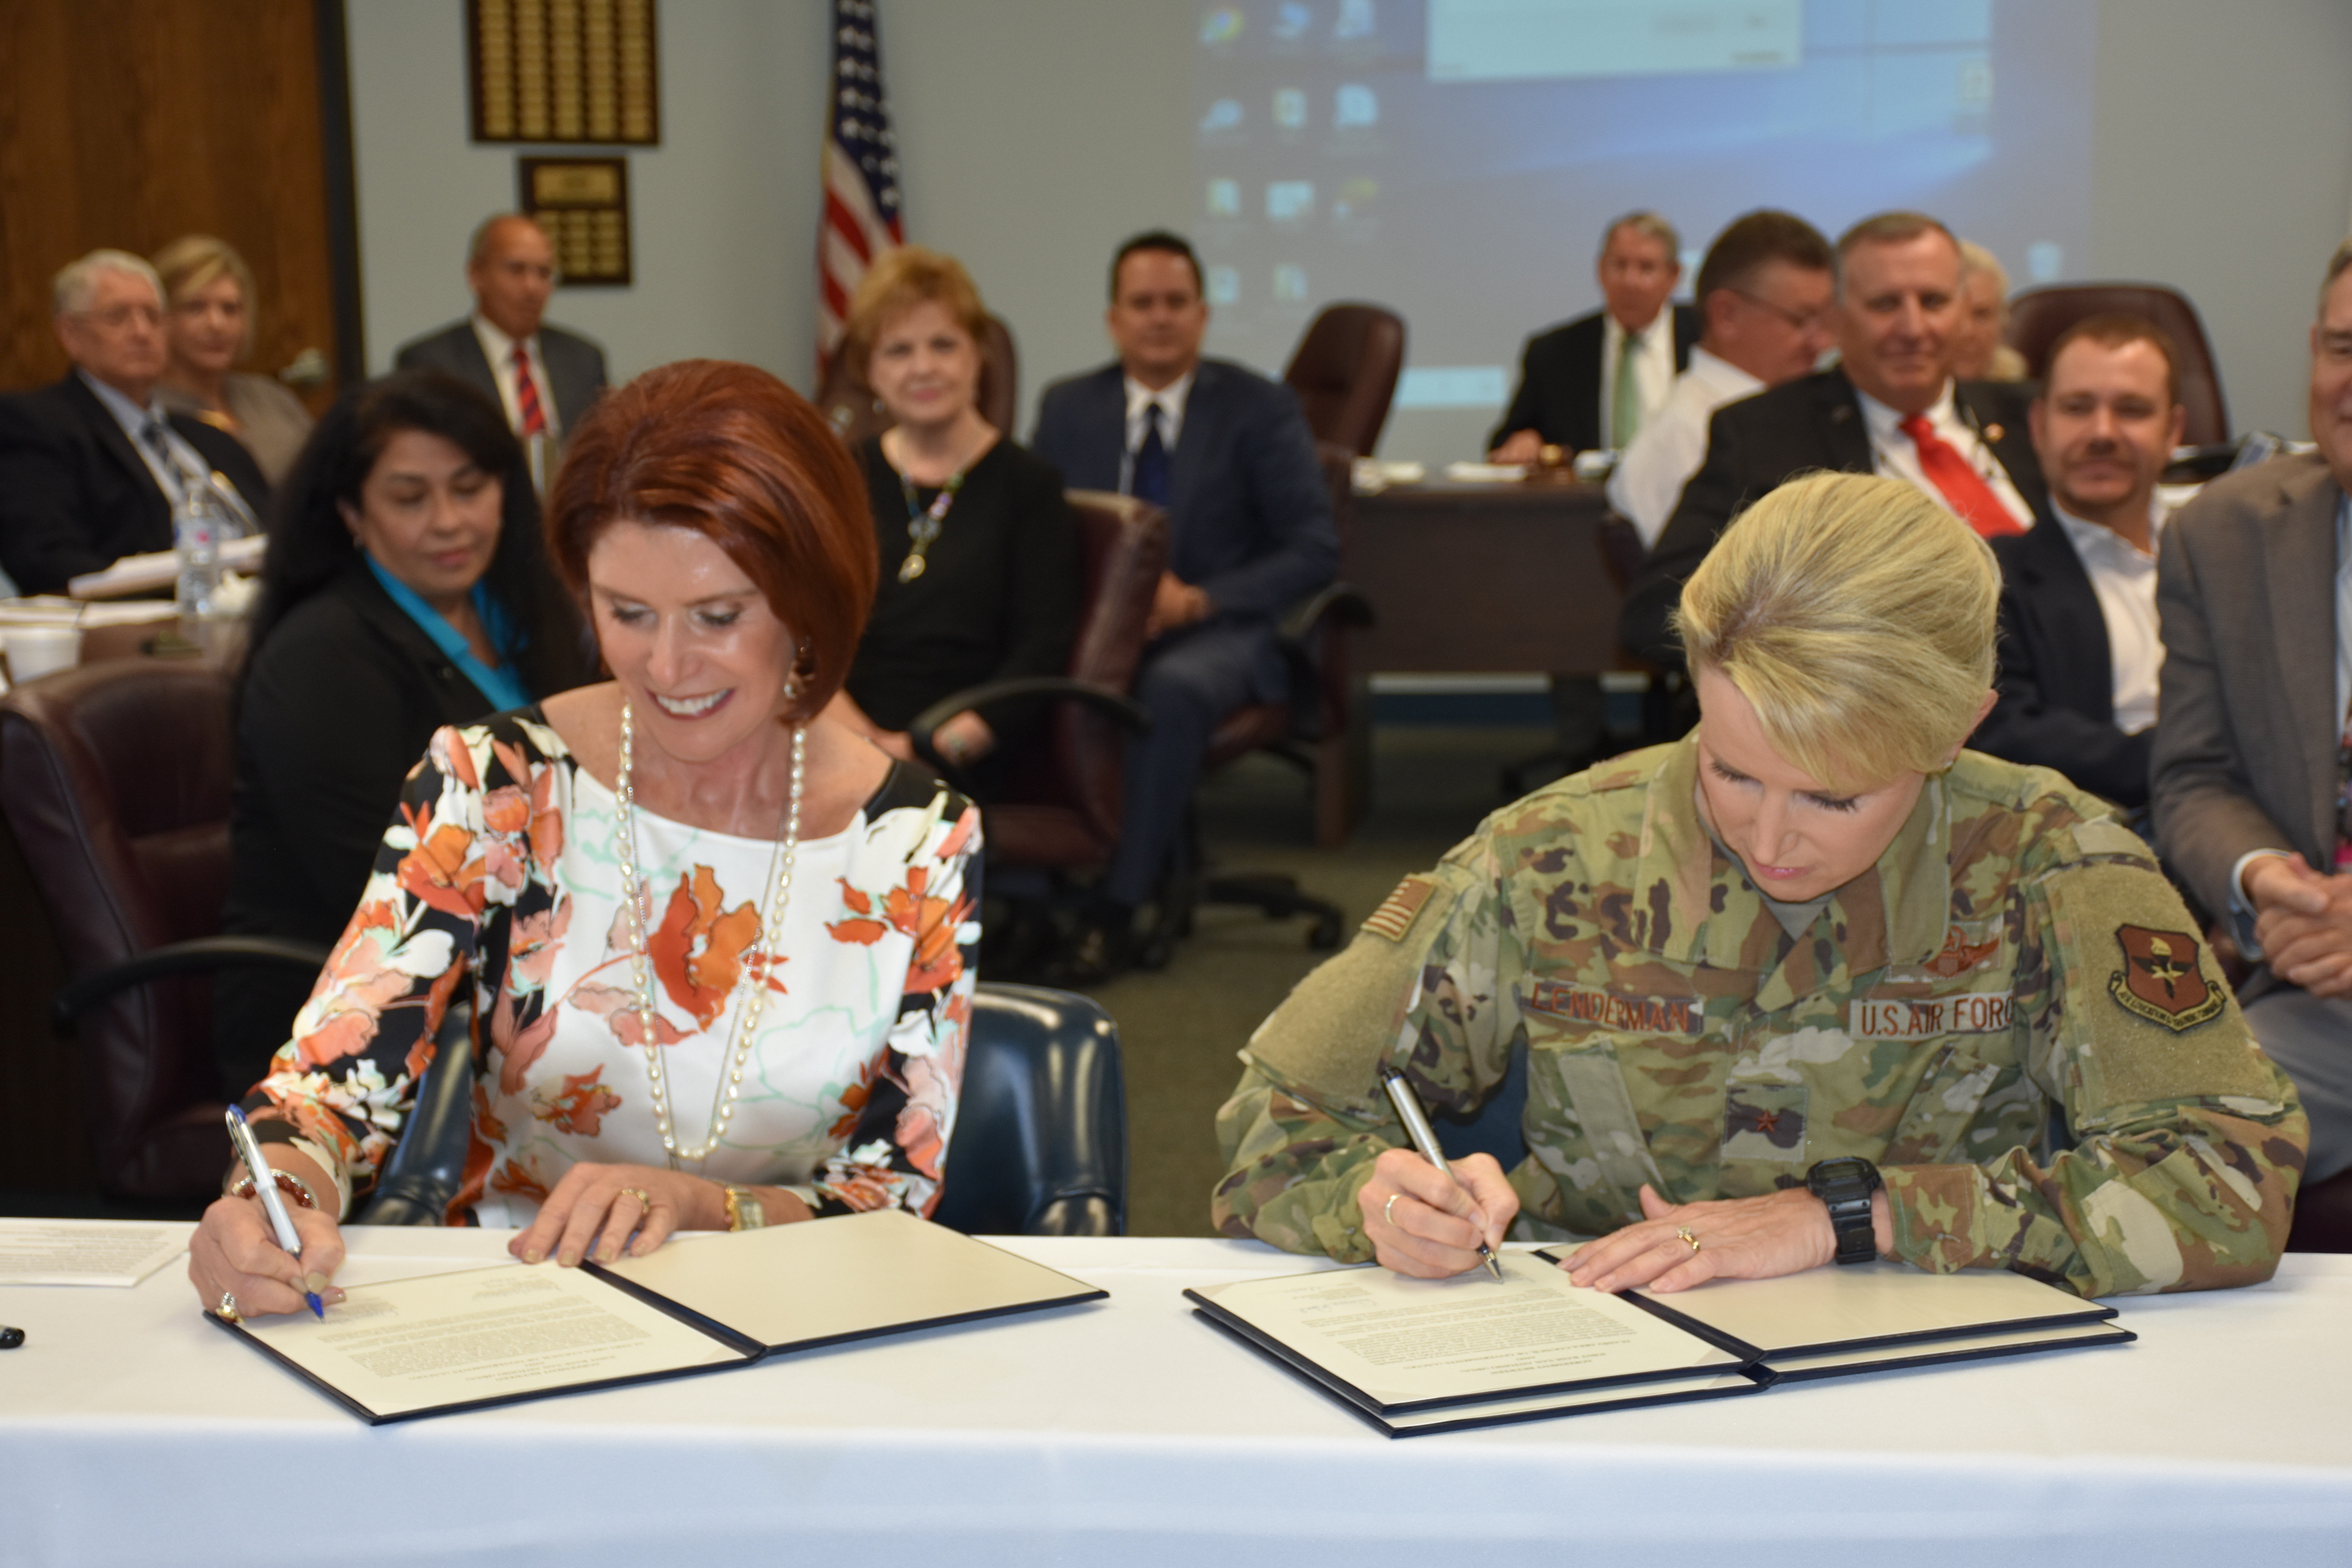 Leaders from Joint Base San Antonio and the community recognize their collaboration